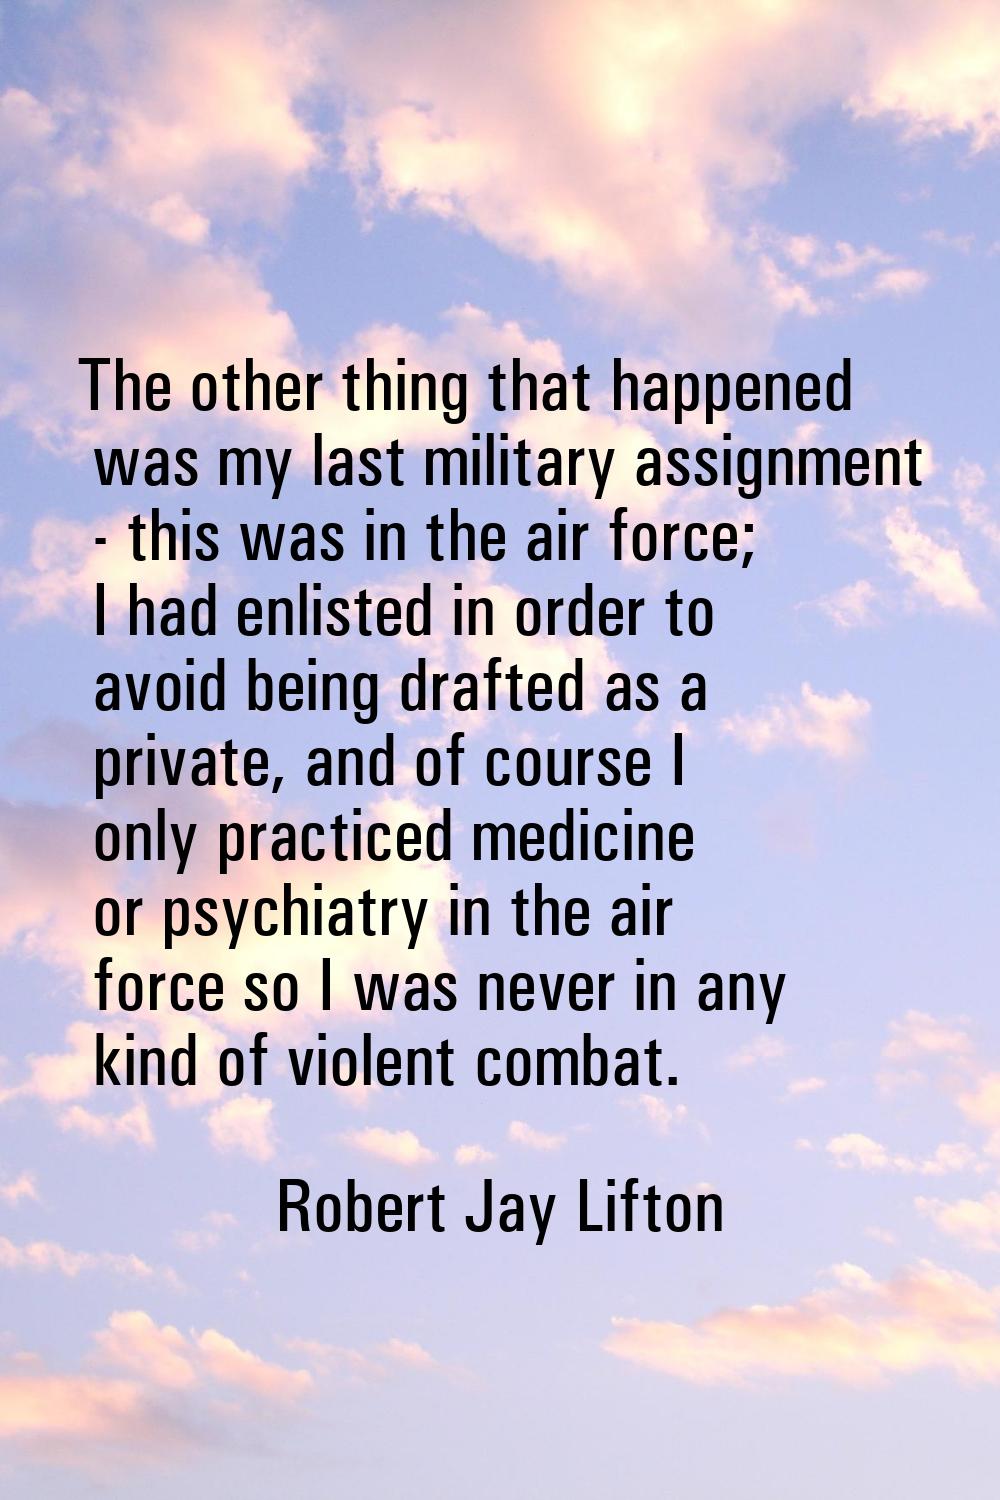 The other thing that happened was my last military assignment - this was in the air force; I had en